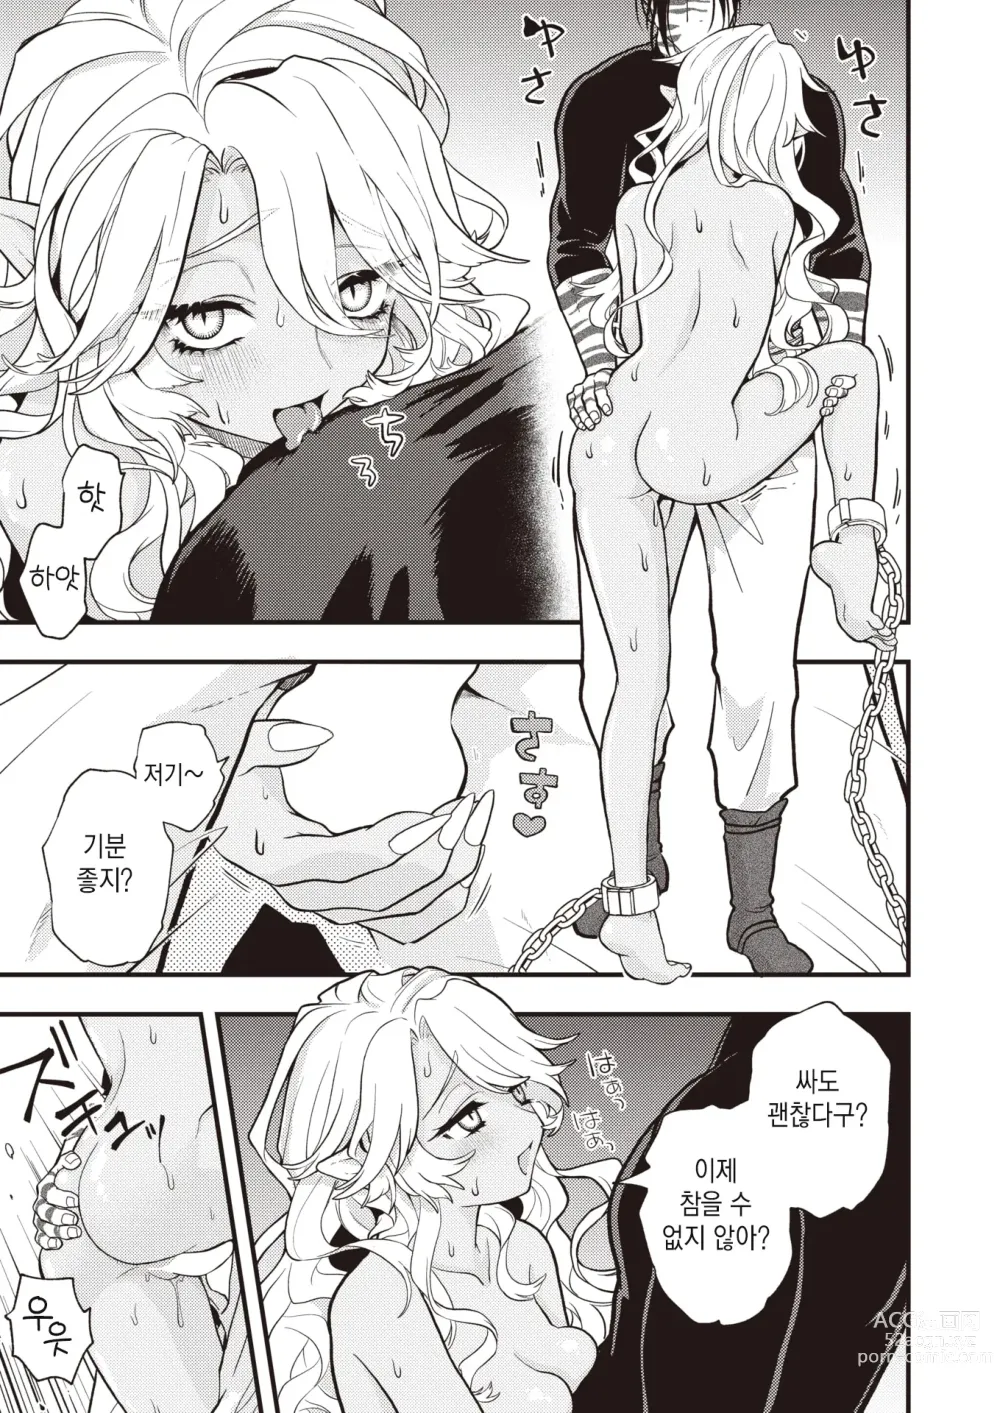 Page 19 of manga DEAD OR SEX 후편